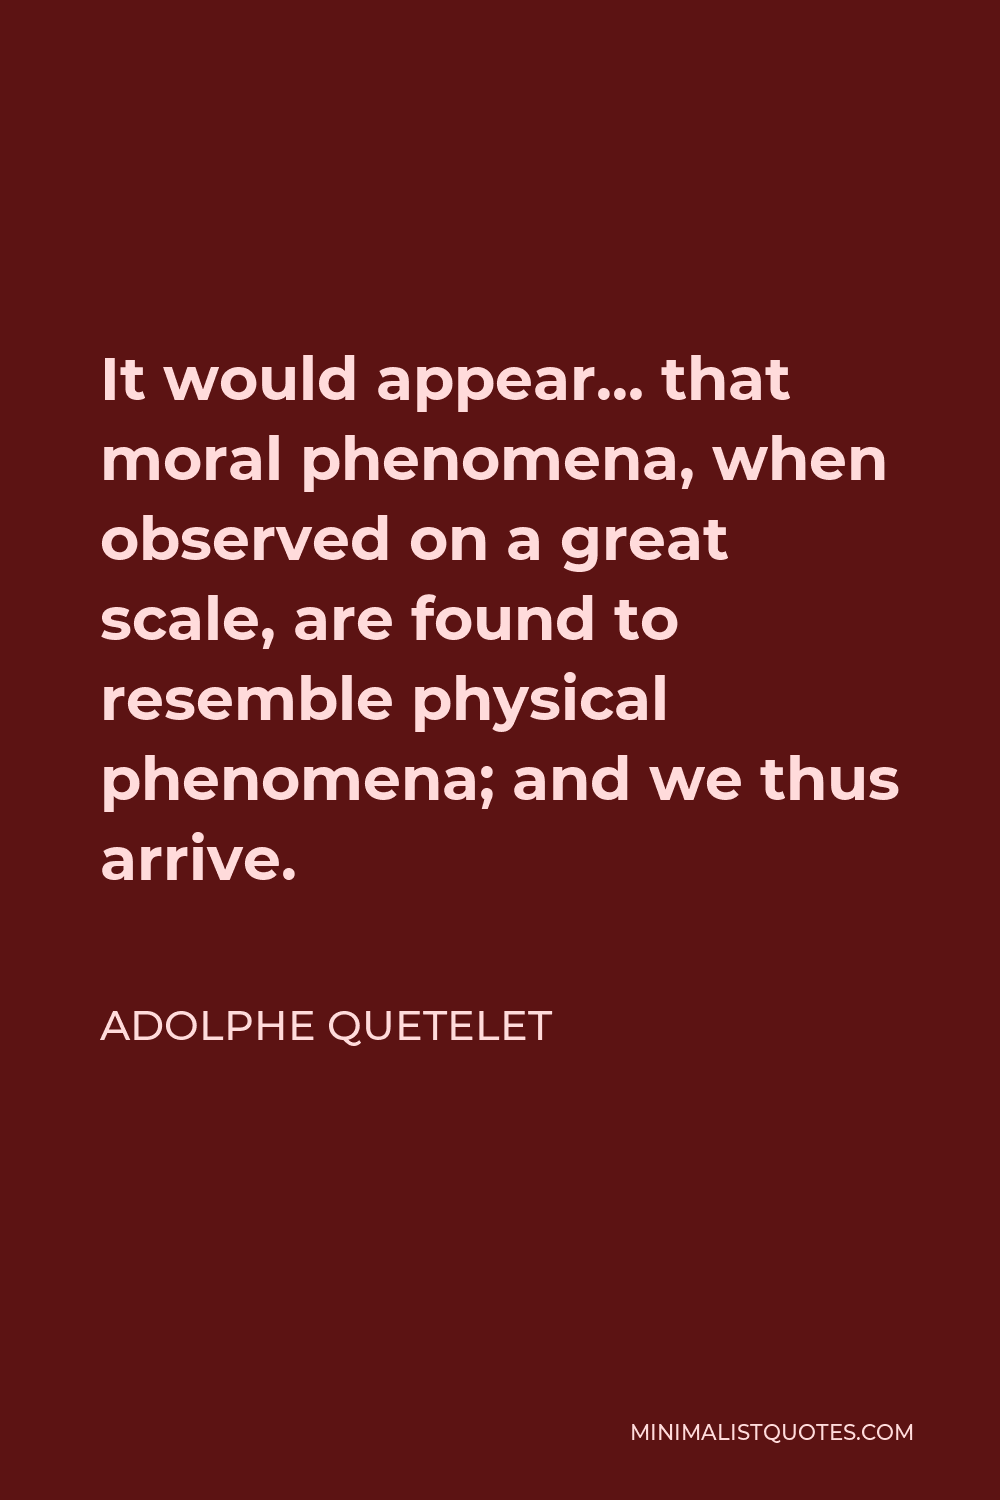 Adolphe Quetelet Quote - It would appear… that moral phenomena, when observed on a great scale, are found to resemble physical phenomena; and we thus arrive.